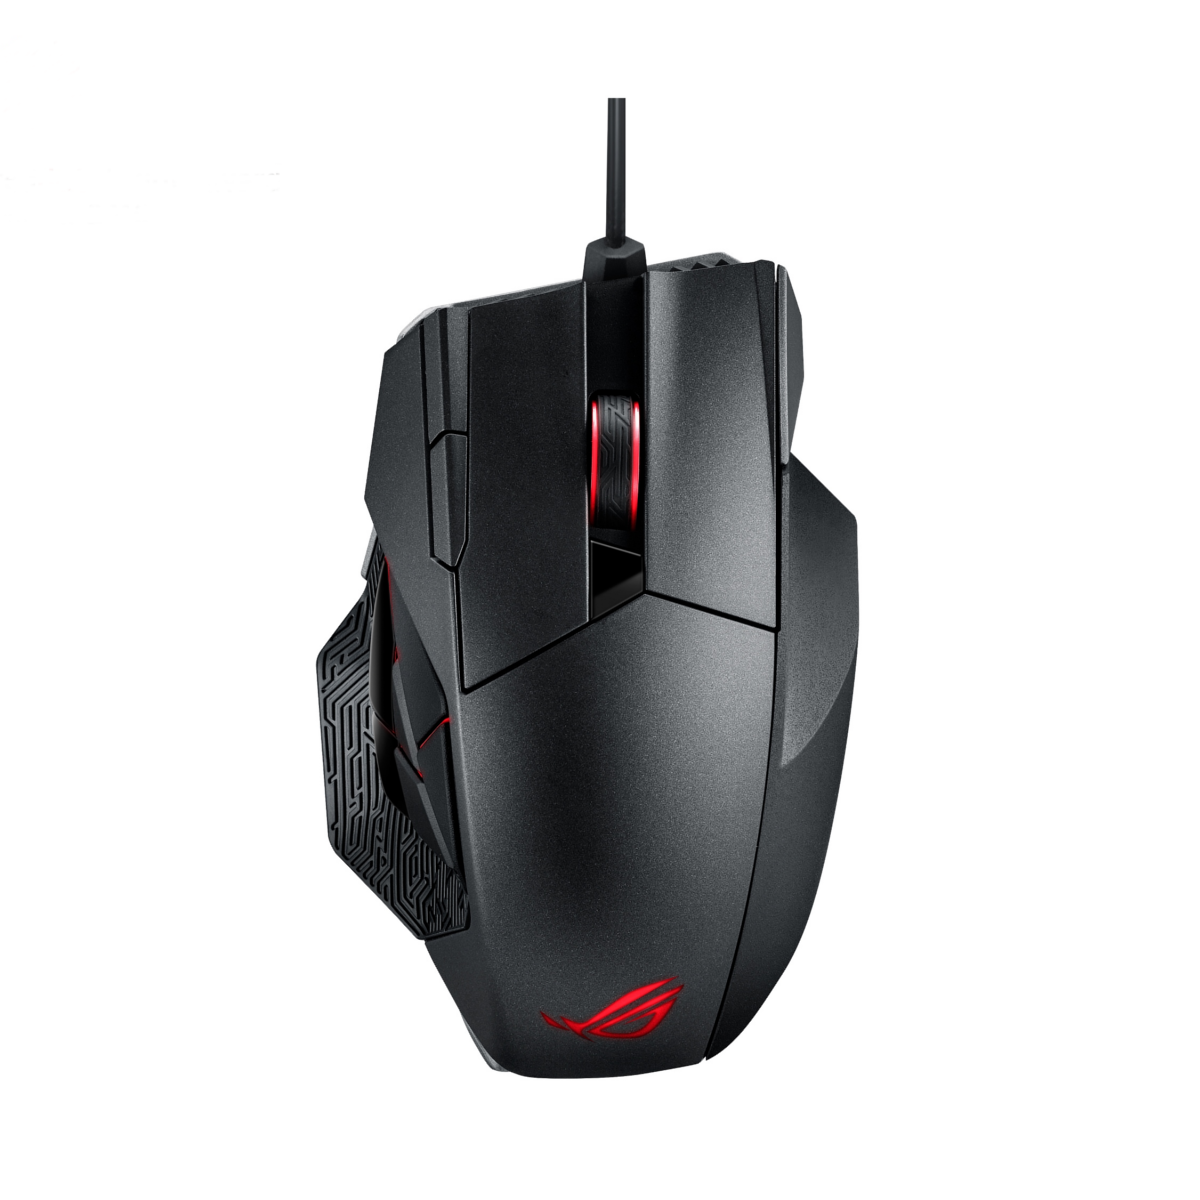 Asus - ASUS ROG Spatha Wireless/Wired RGB Gaming Mouse (90MP00A1-B0UA00)